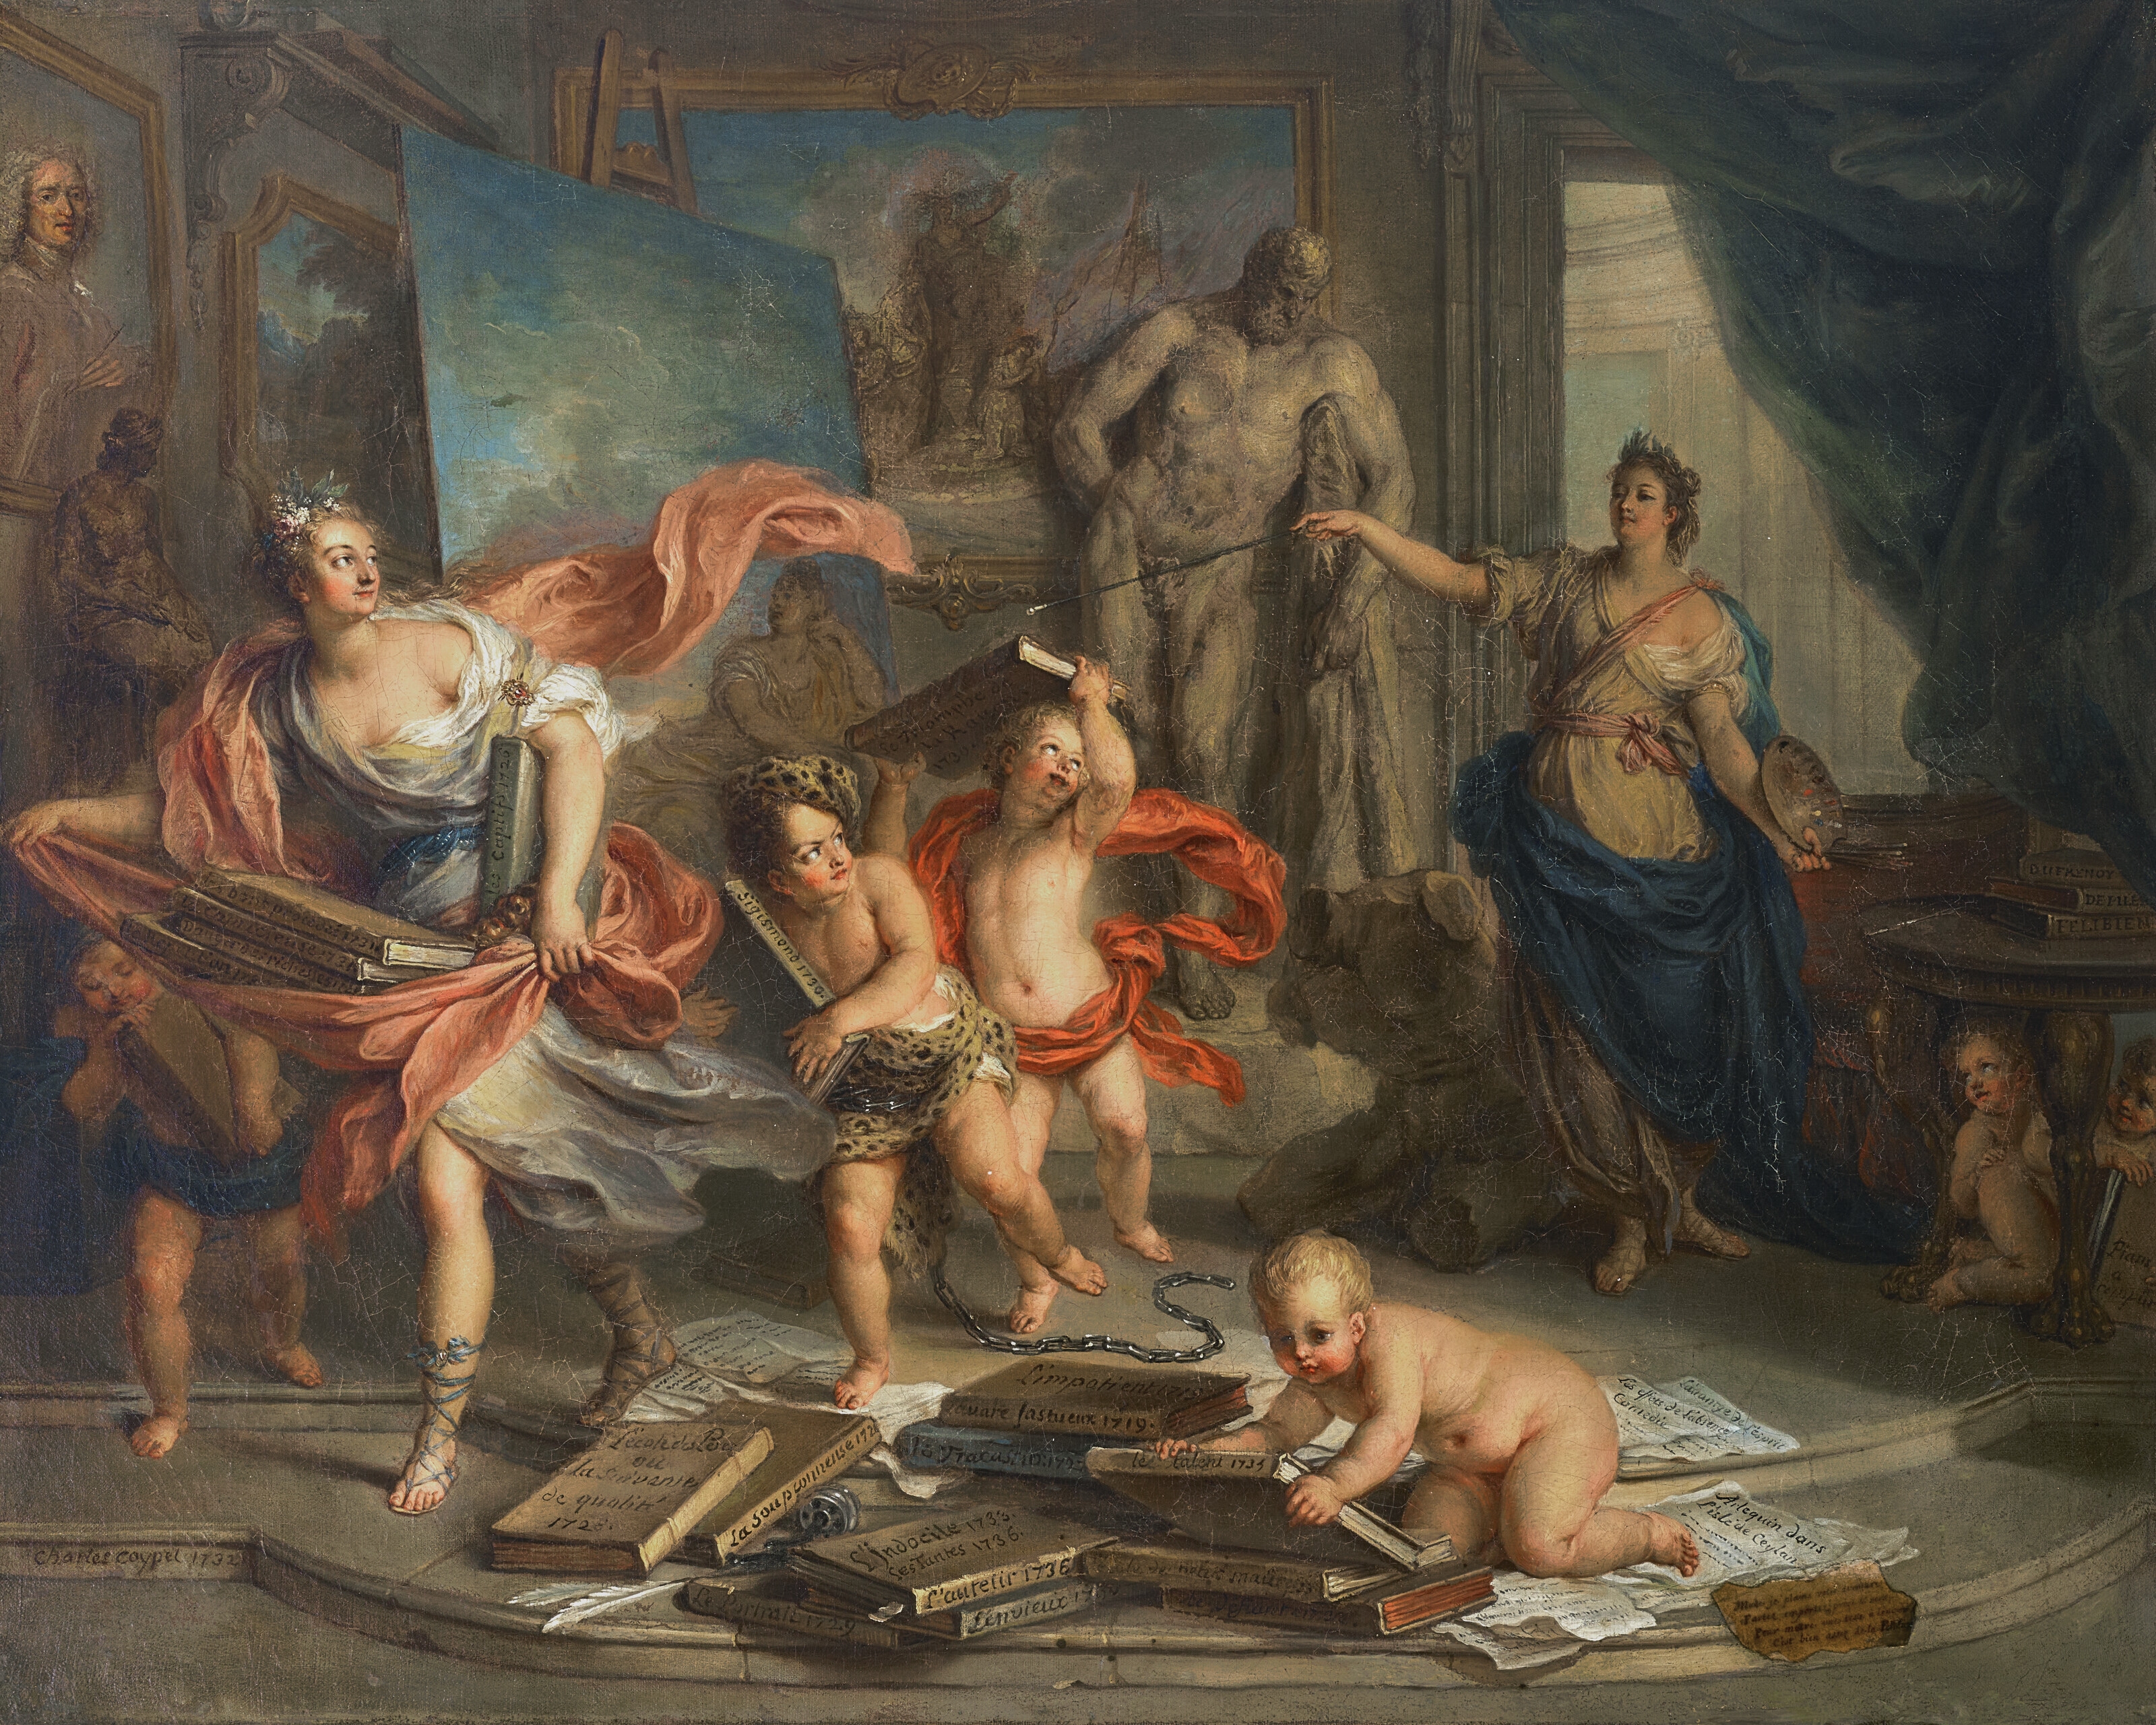 Thalia chased by Painting by Charles-Antoine Coypel, 1732